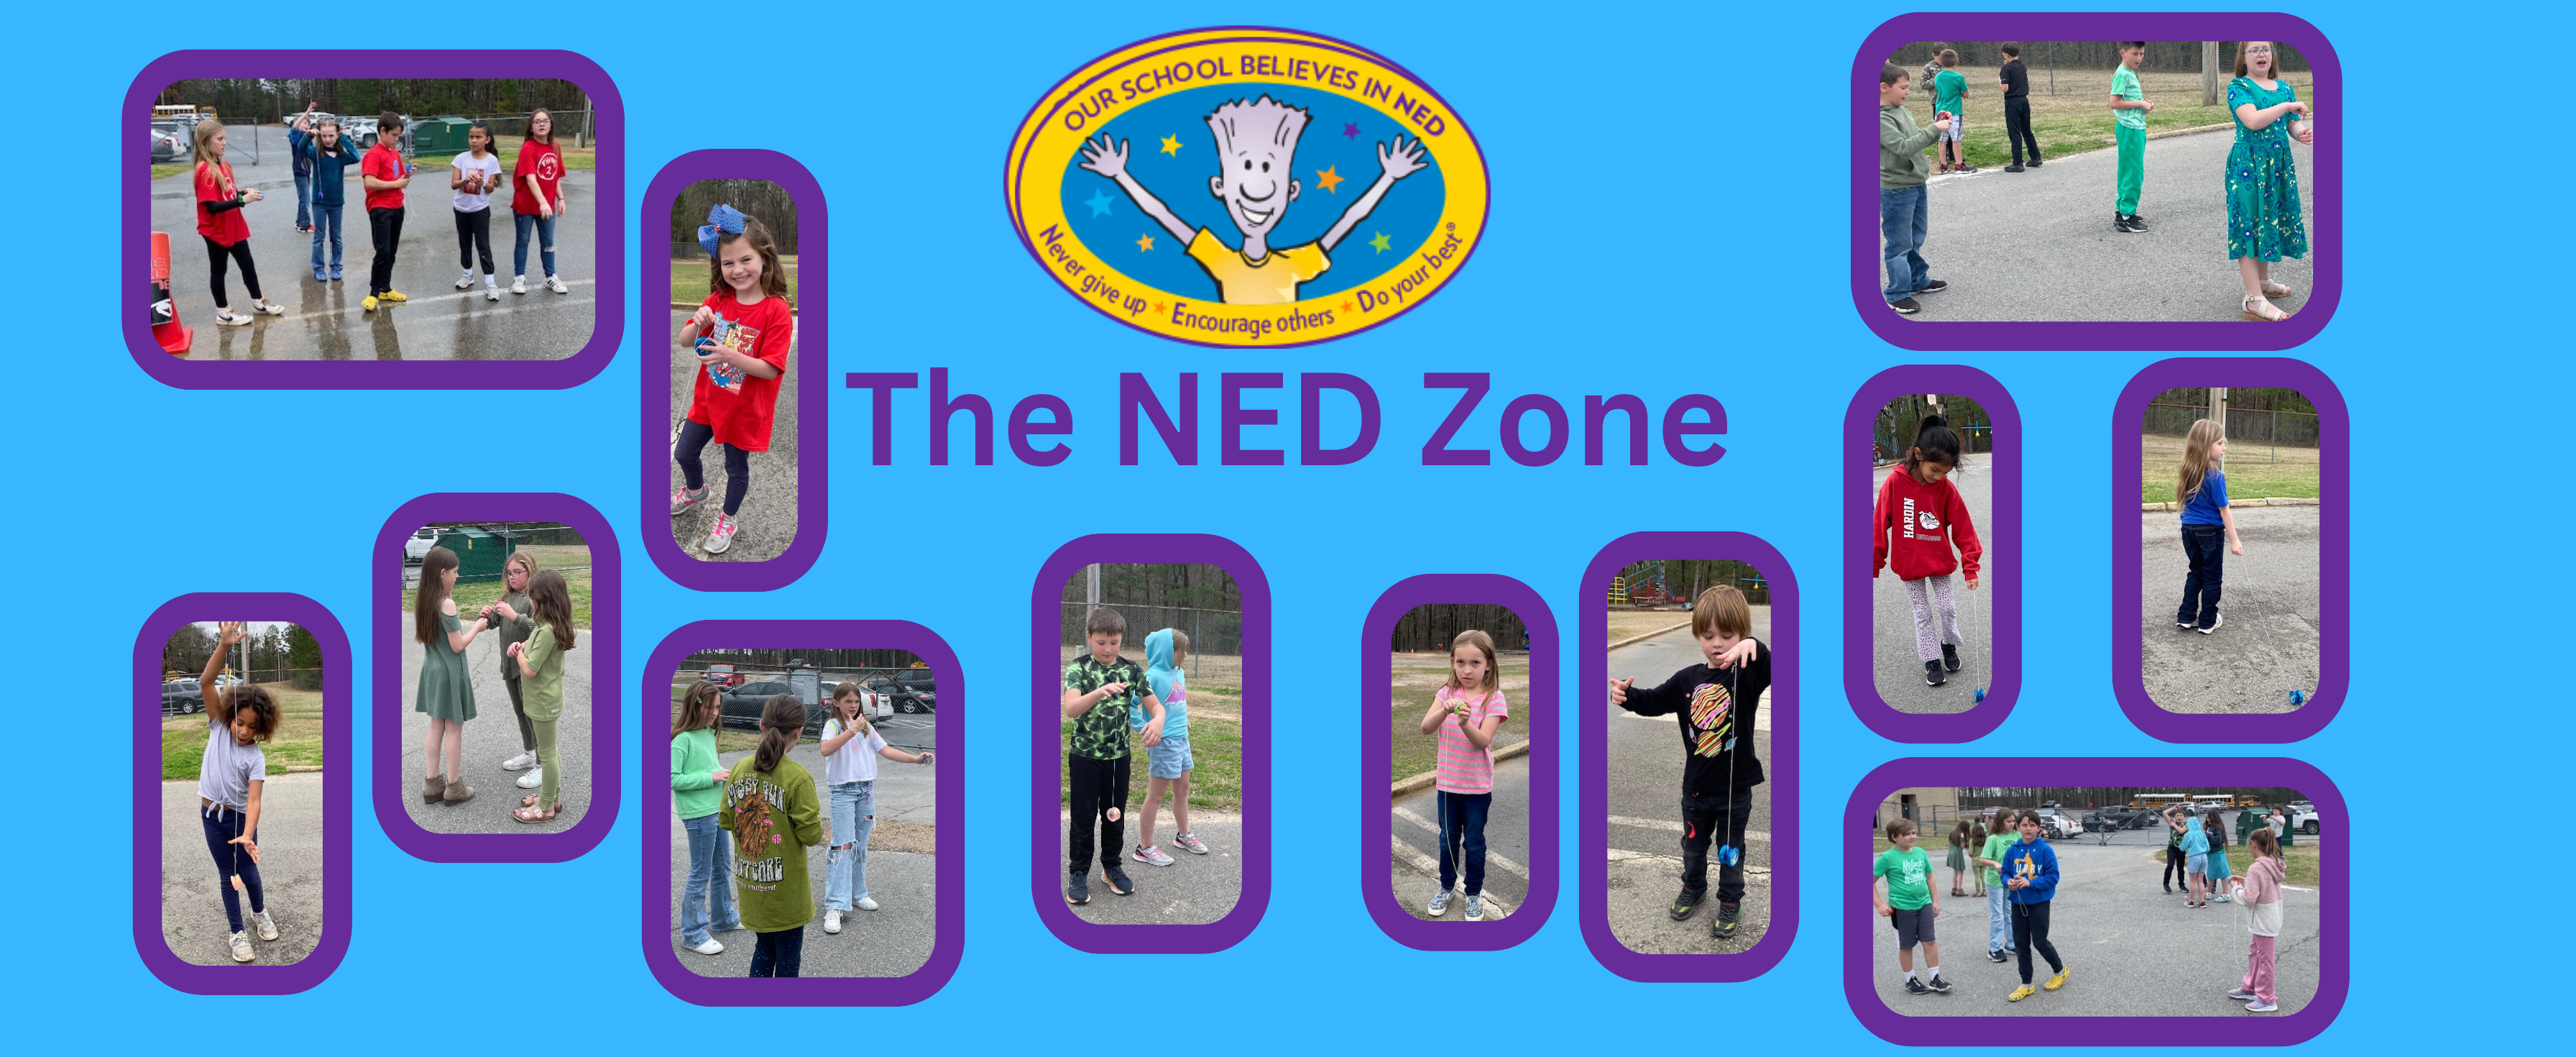 The NED Zone